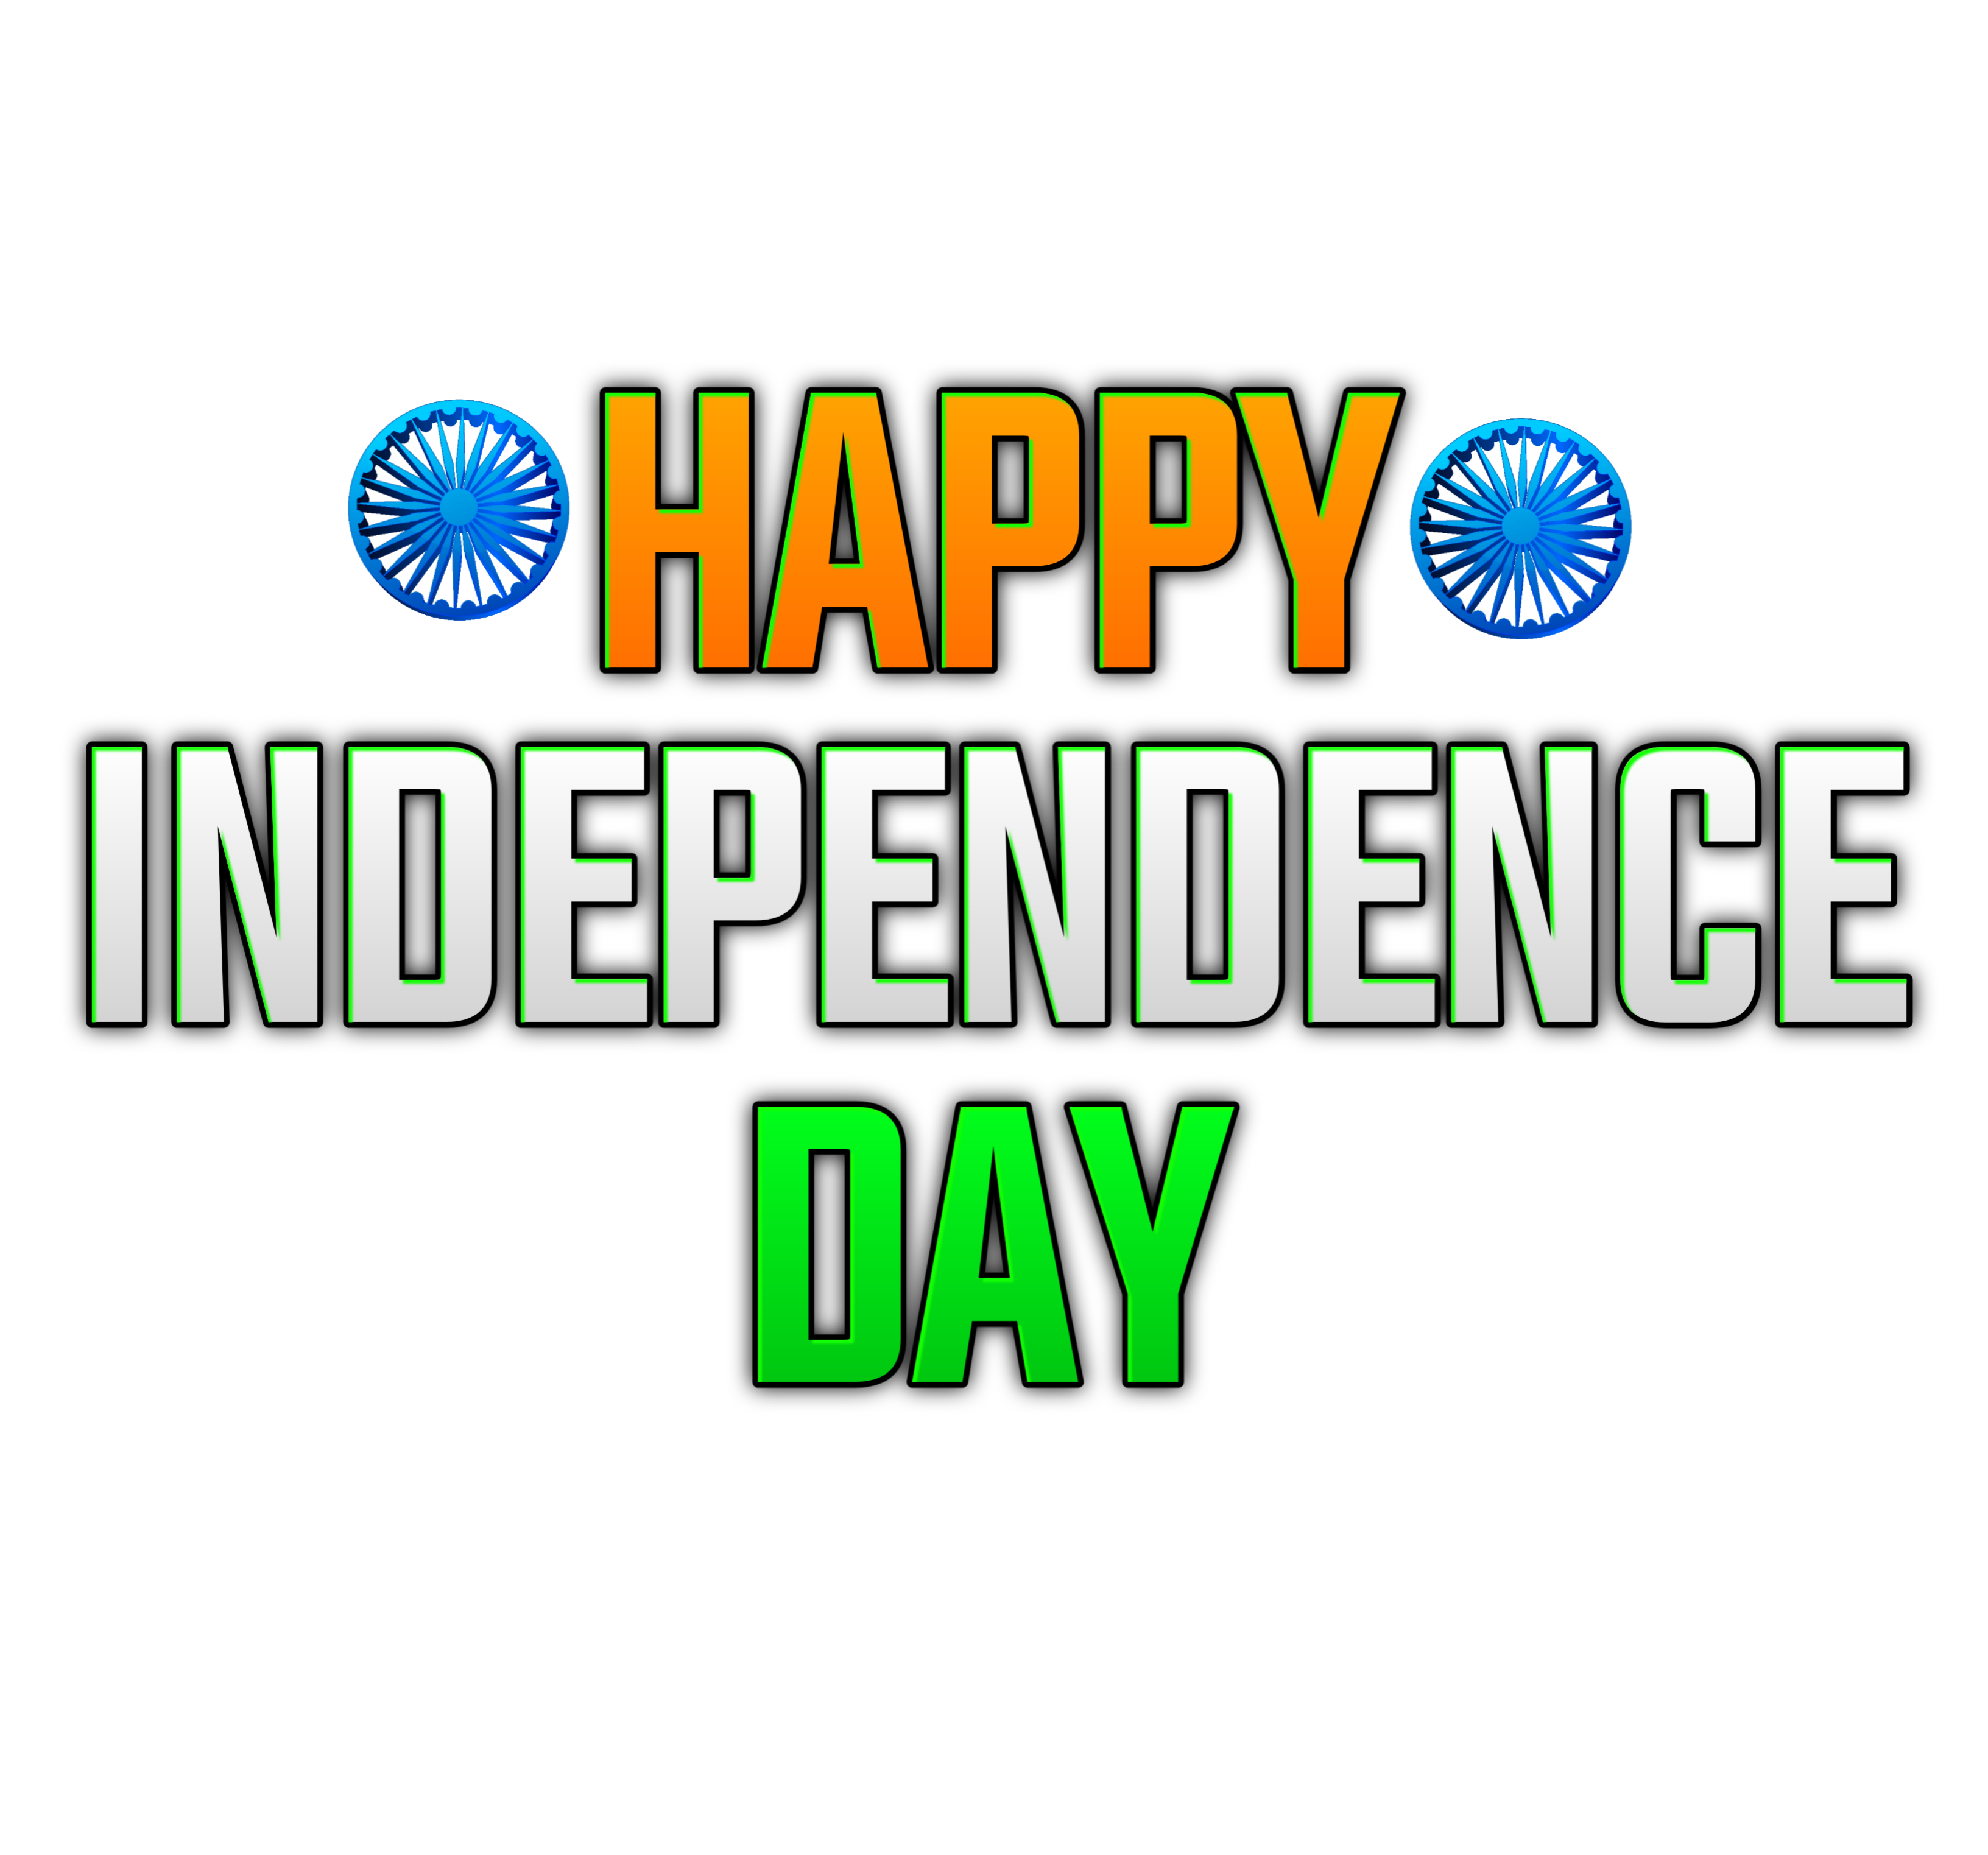 Independence Day wish